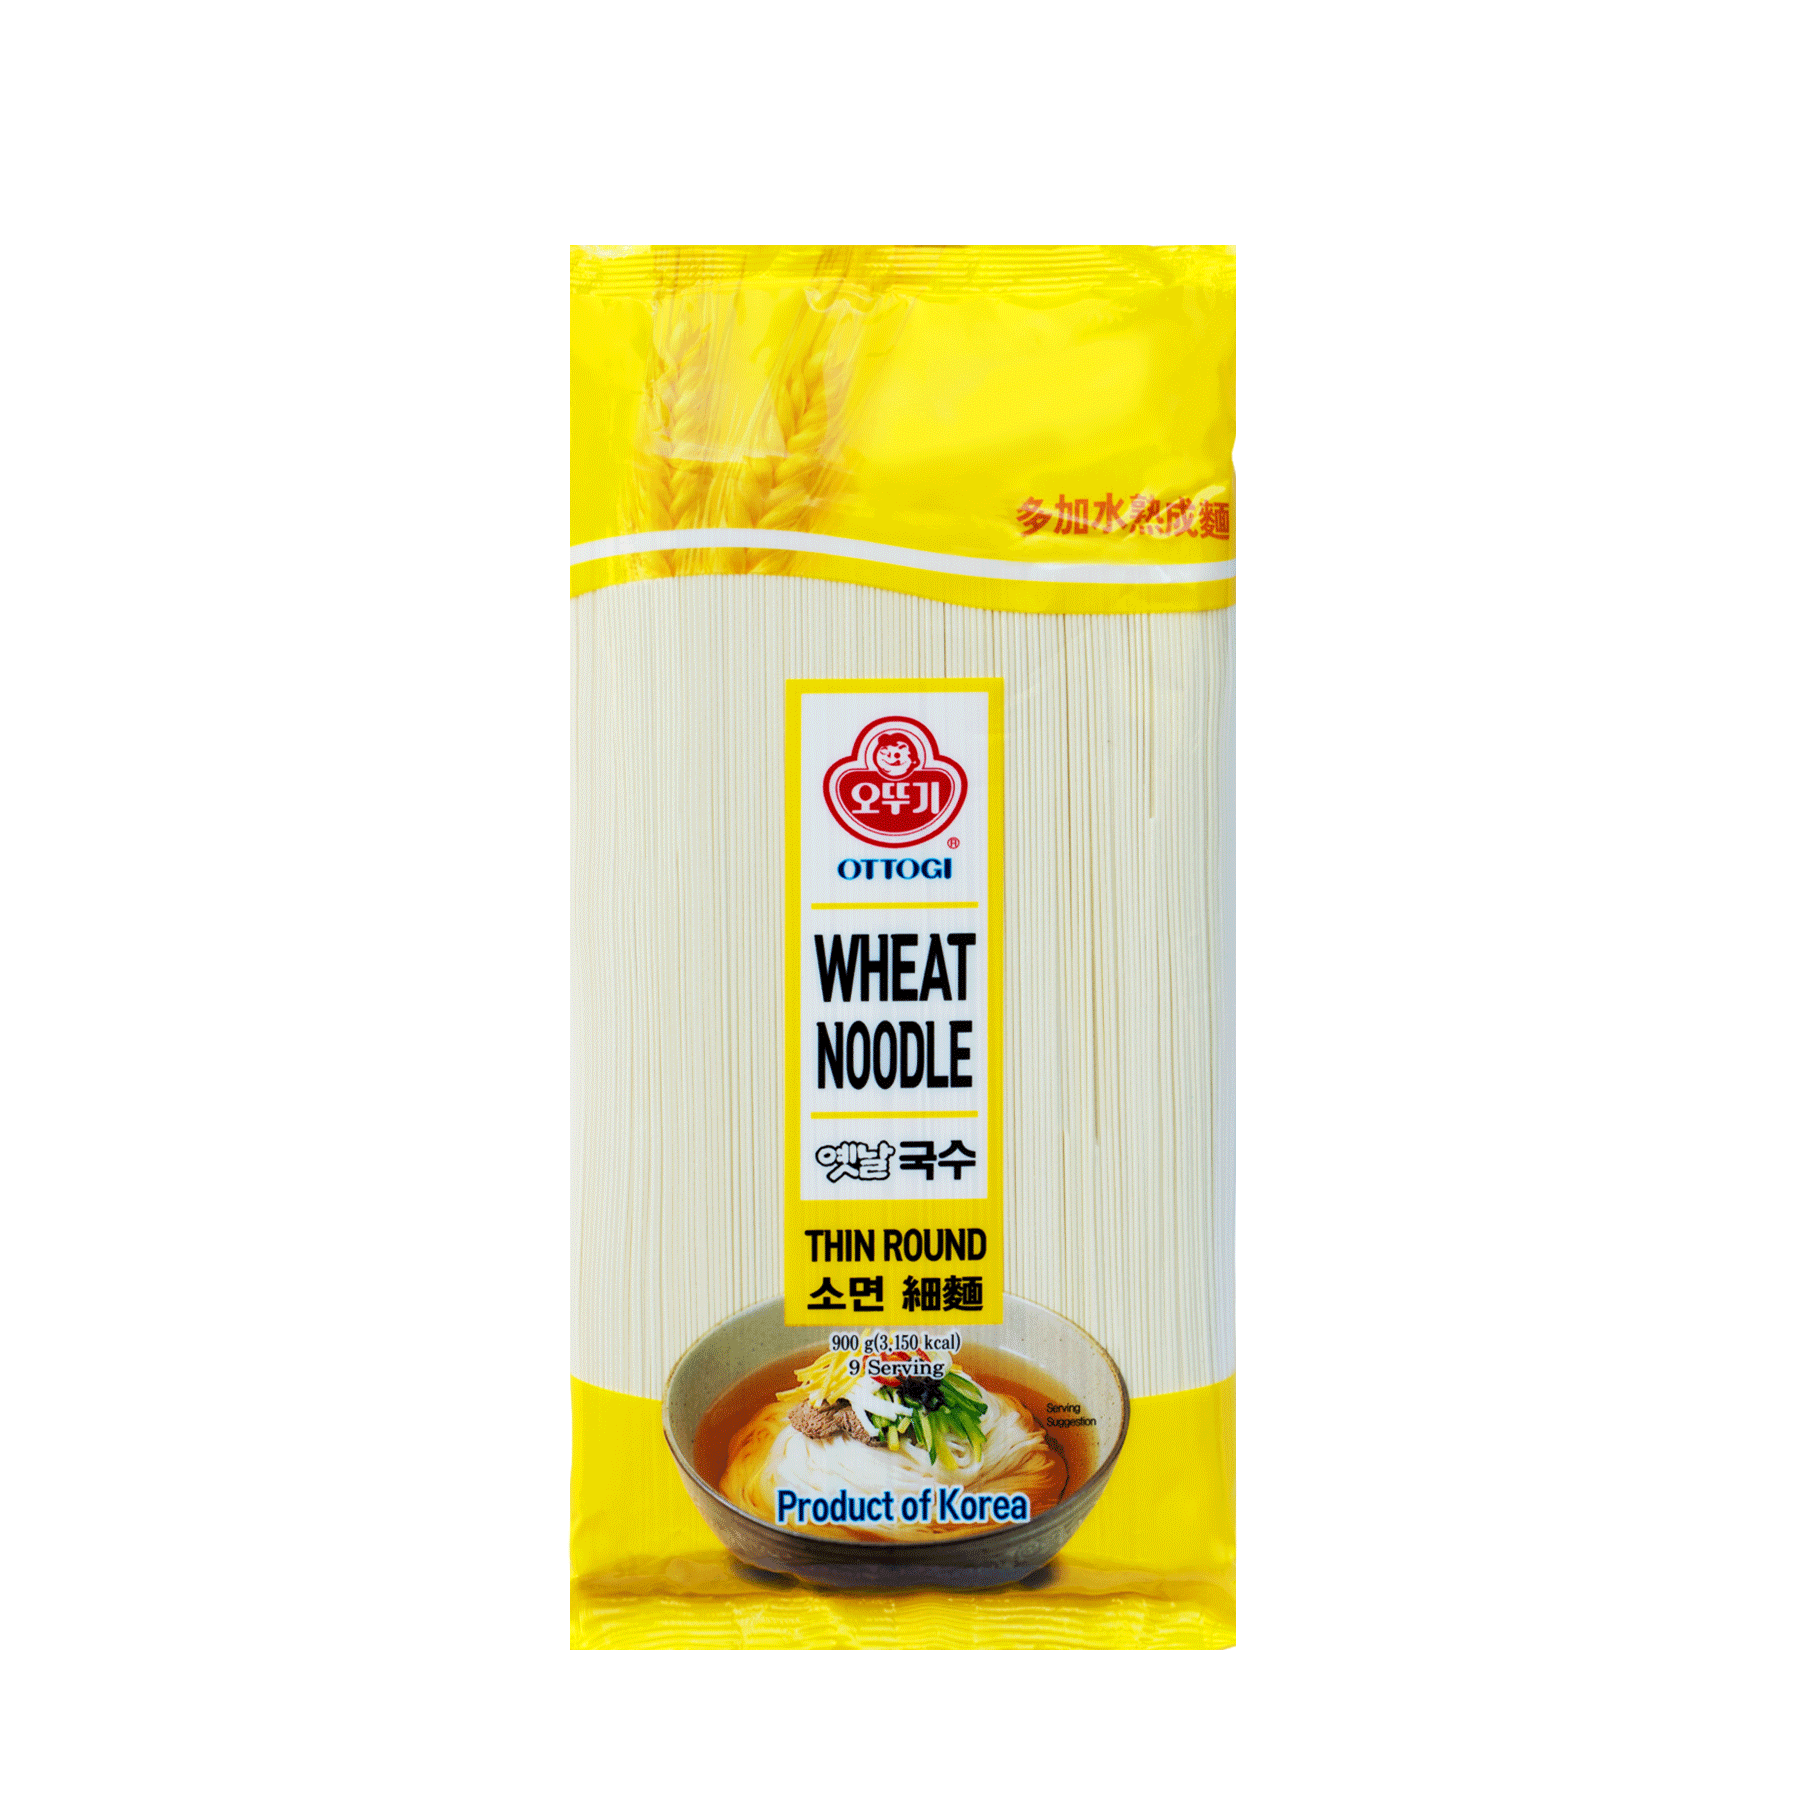 Wheat Noodle (Thin Round) 900g